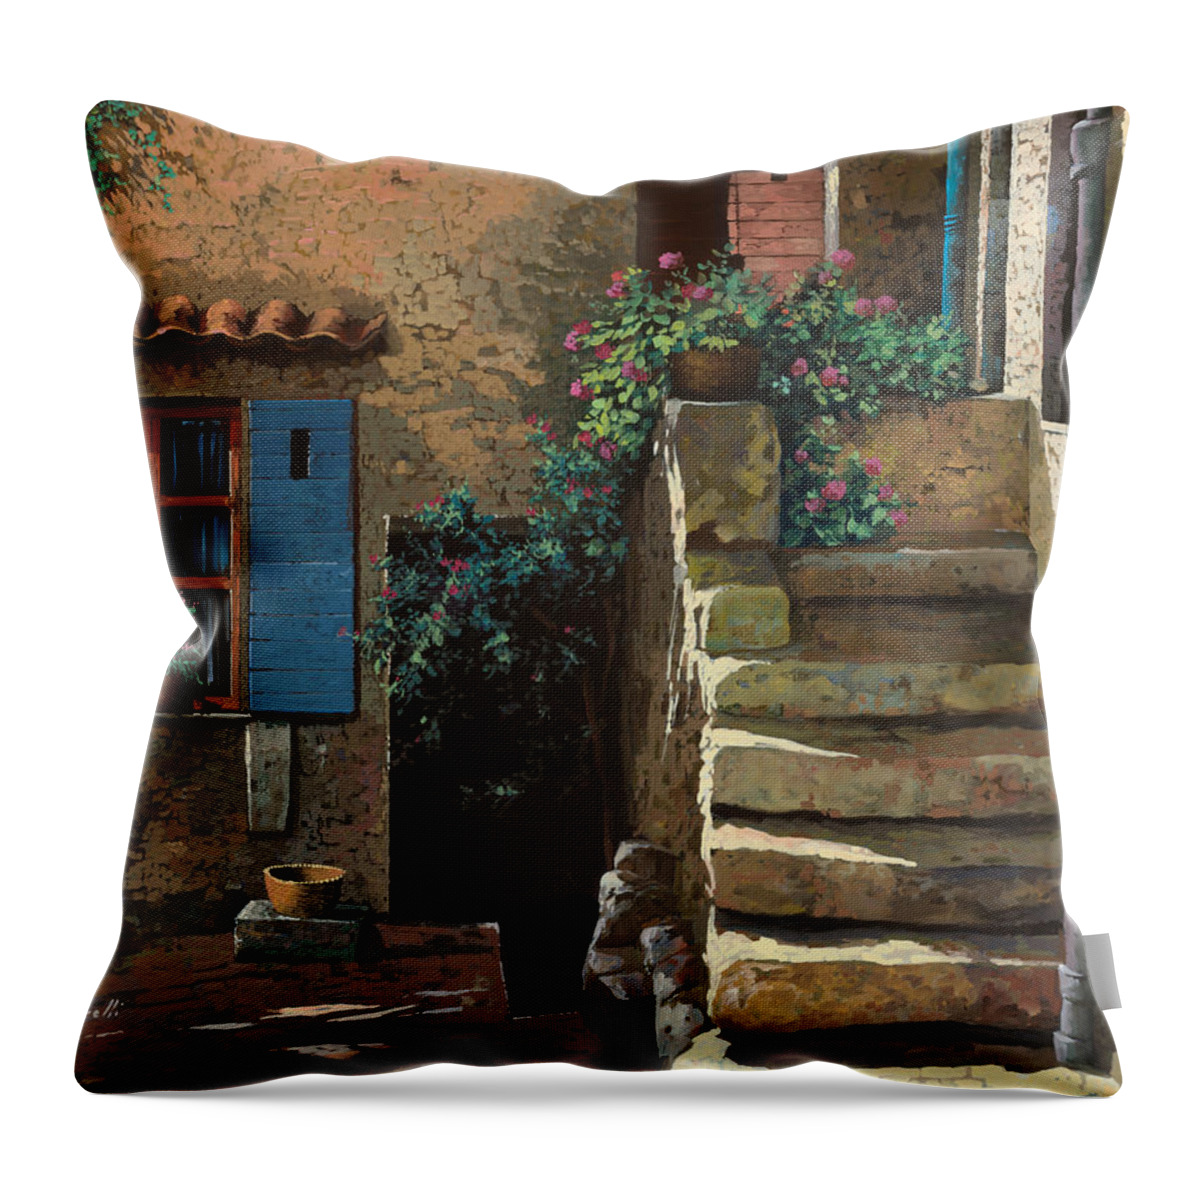 Courtyard Throw Pillow featuring the painting Cortile Interno by Guido Borelli